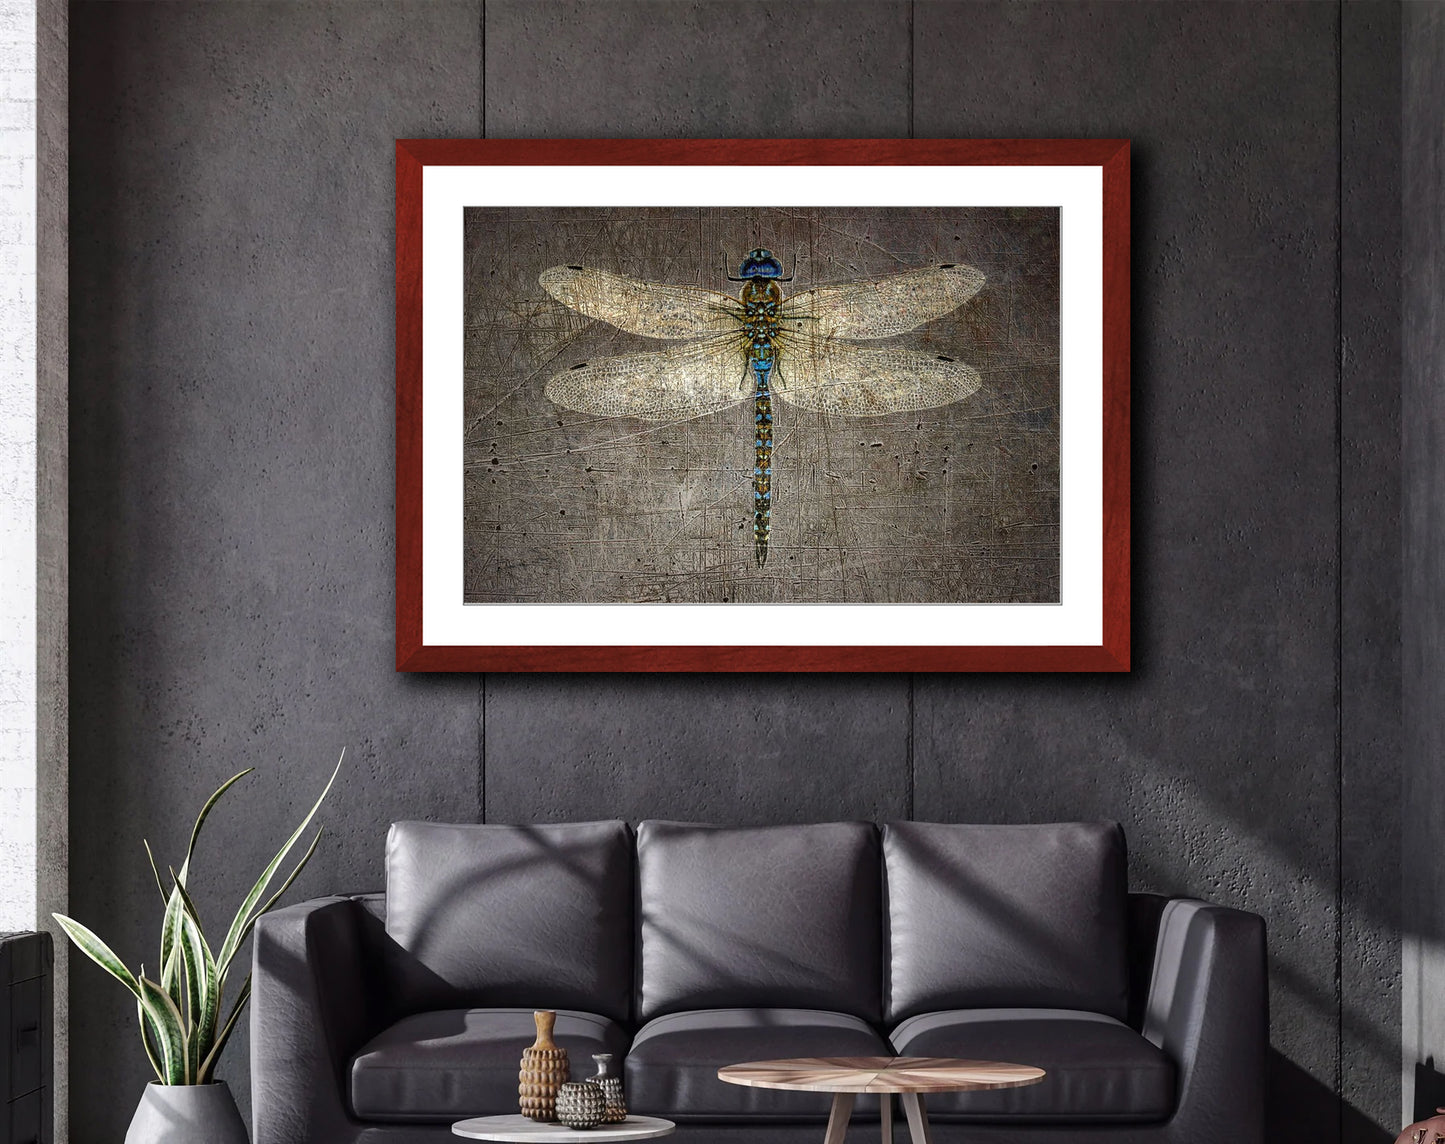 Dragonfly on gray Stone Background Framed in a Rectangle Cherry Color Wood Frame 3 sizes available